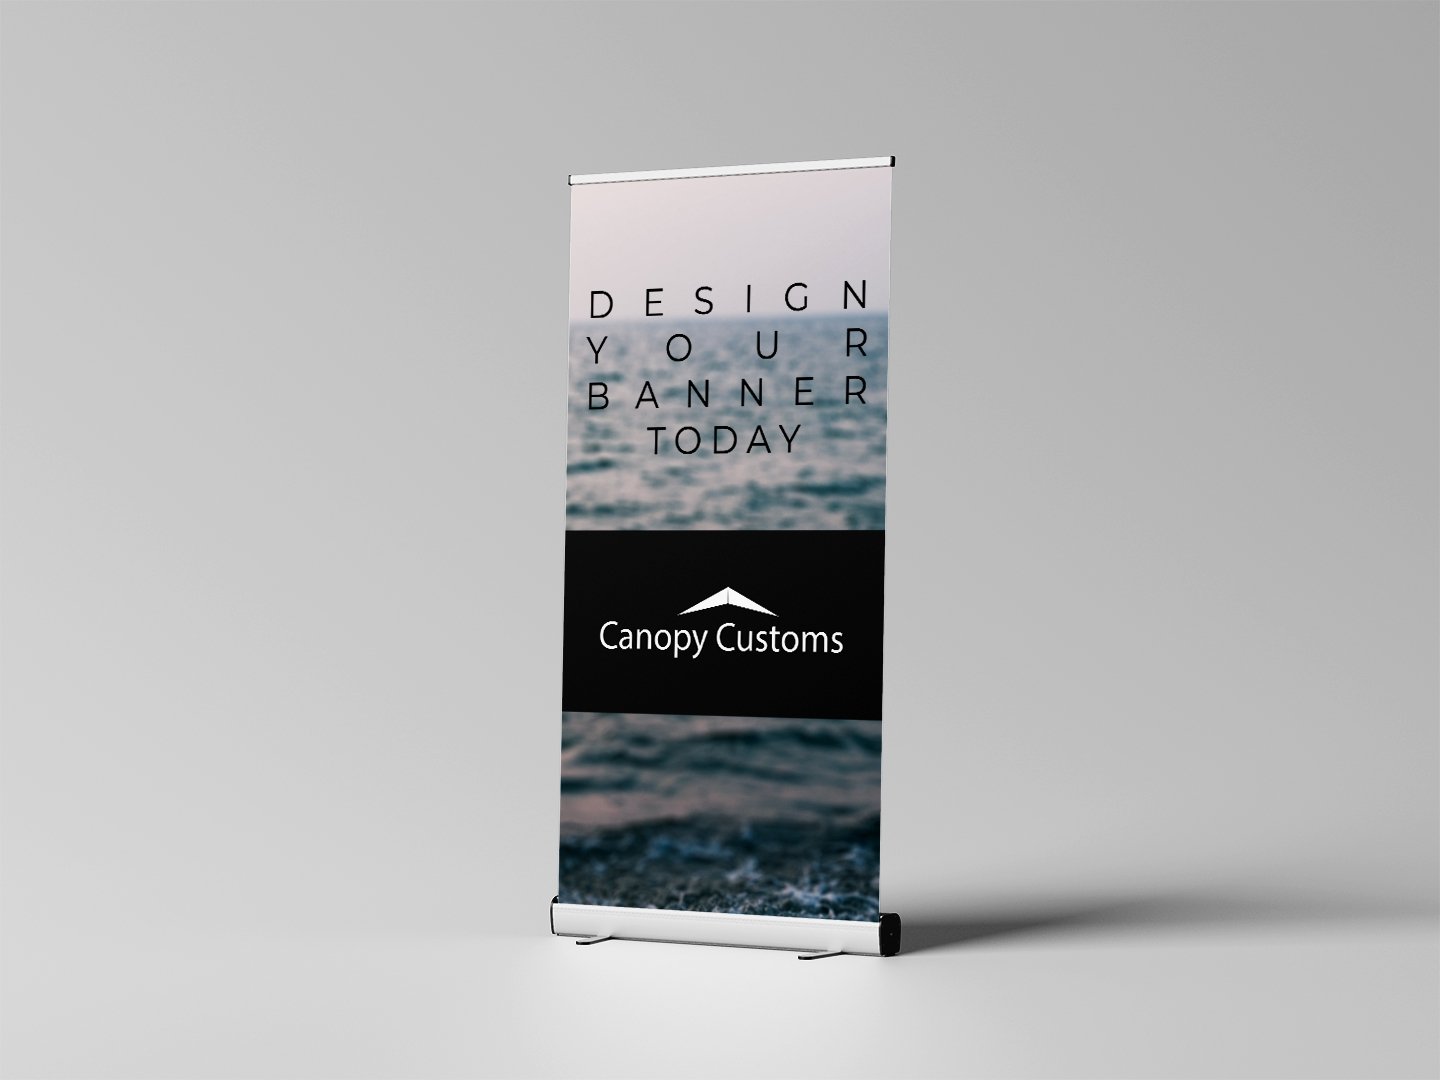 The Double Sided Roll Up Banner - Canopy Customs